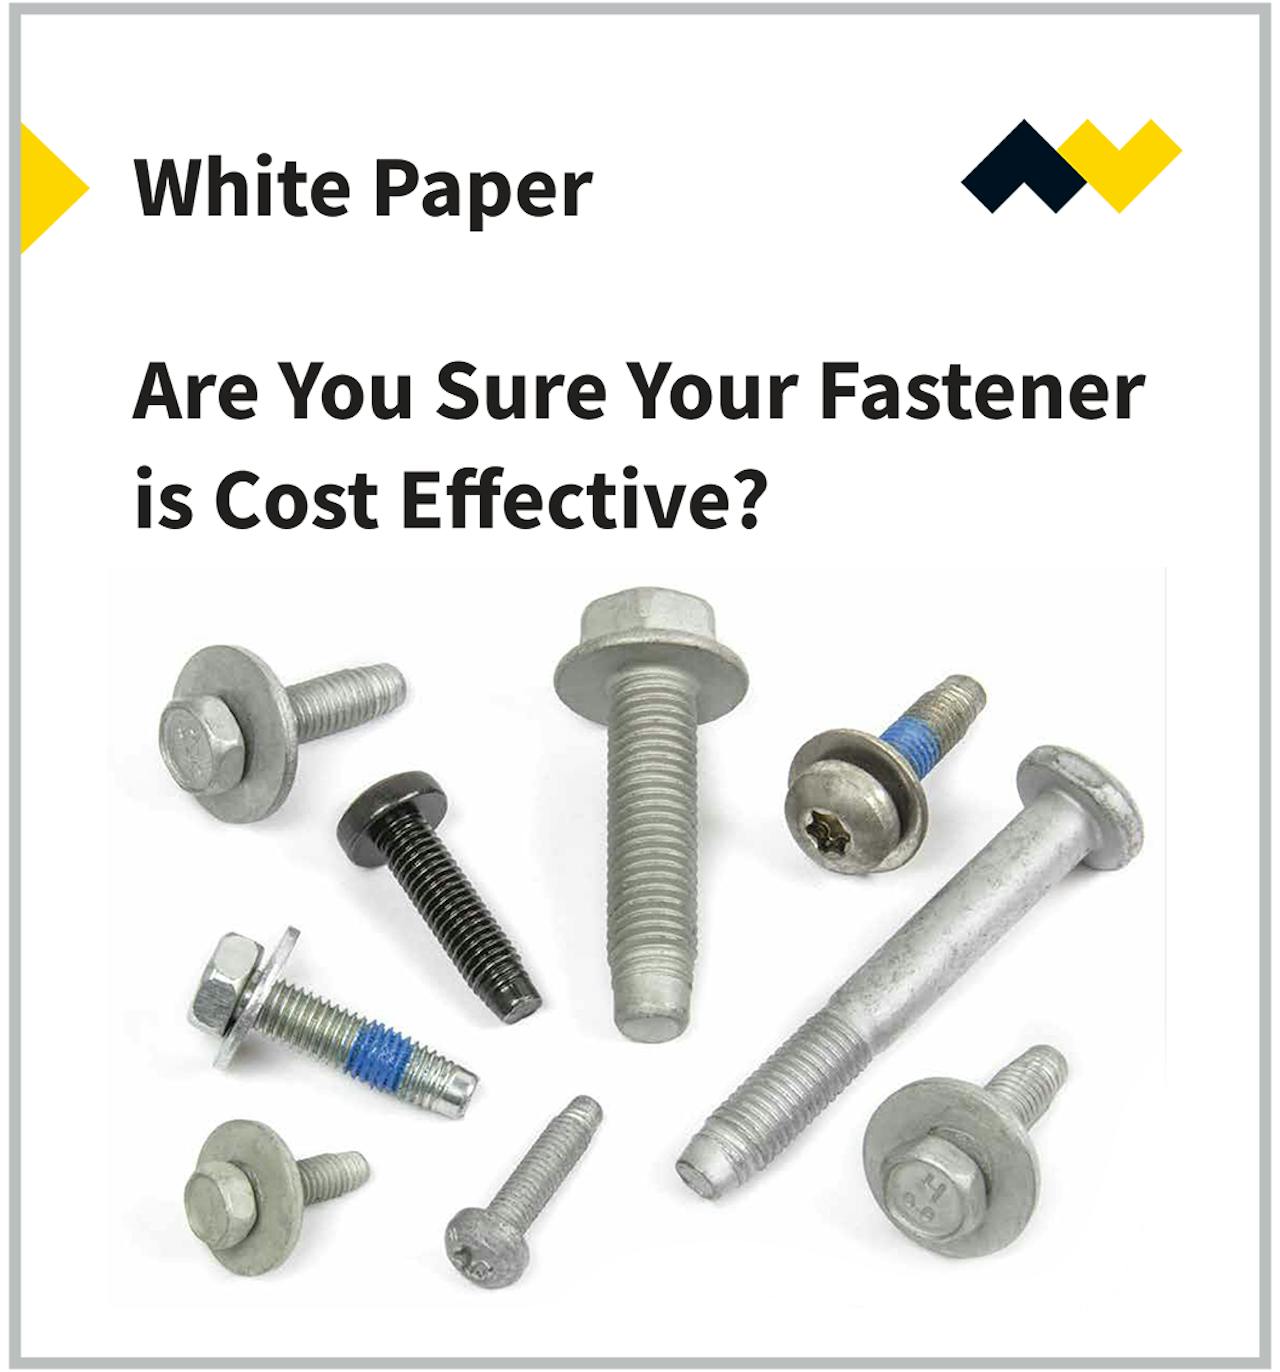 Are You Sure Your Fastener is Cost Effective